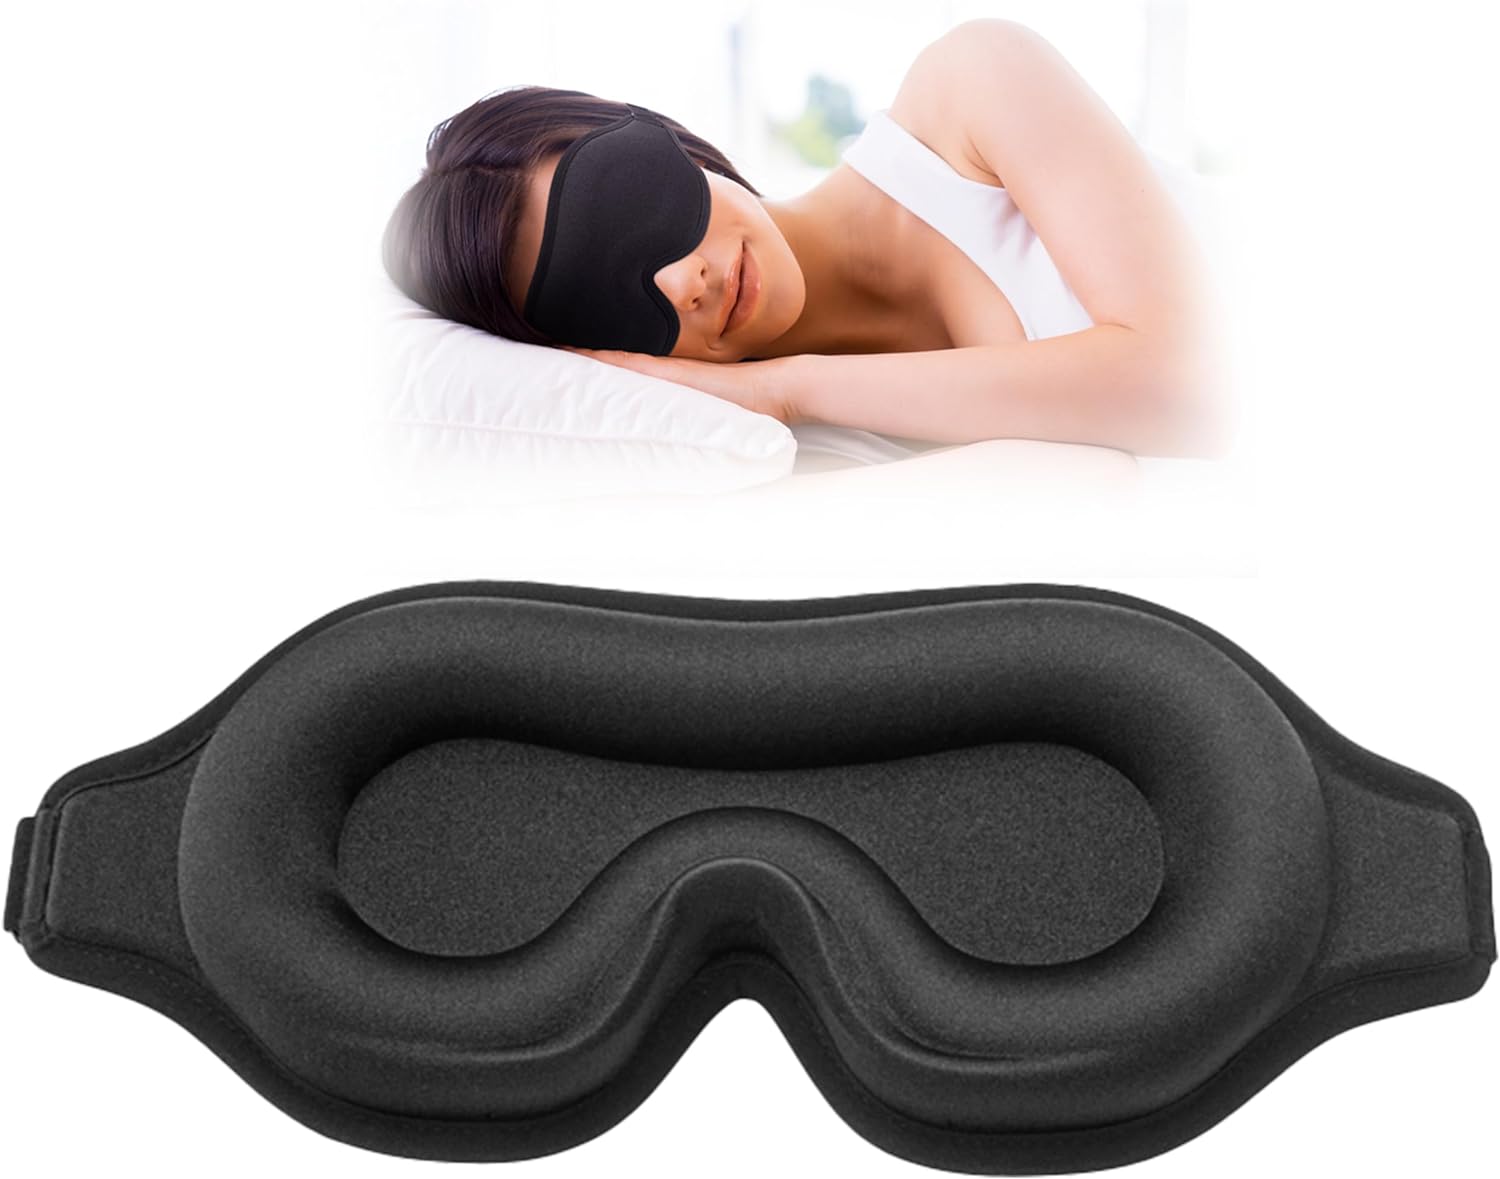 This sleep eye mask is probably the BEST sleep eye mask I've ever purchased. It' 3D shape fits comfortably around my eyes, blocking out all light to provide that black-out feel. The strap is adjustable so I can make the mask as snug or as loose as I'd like, and the mask stays on all night...regardless of how wild I may sleep. The ear plugs that come with it work good as well...talk about good noise cancellation for a good and peaceful night' sleep! The travel bag for the eye mask and travel ca